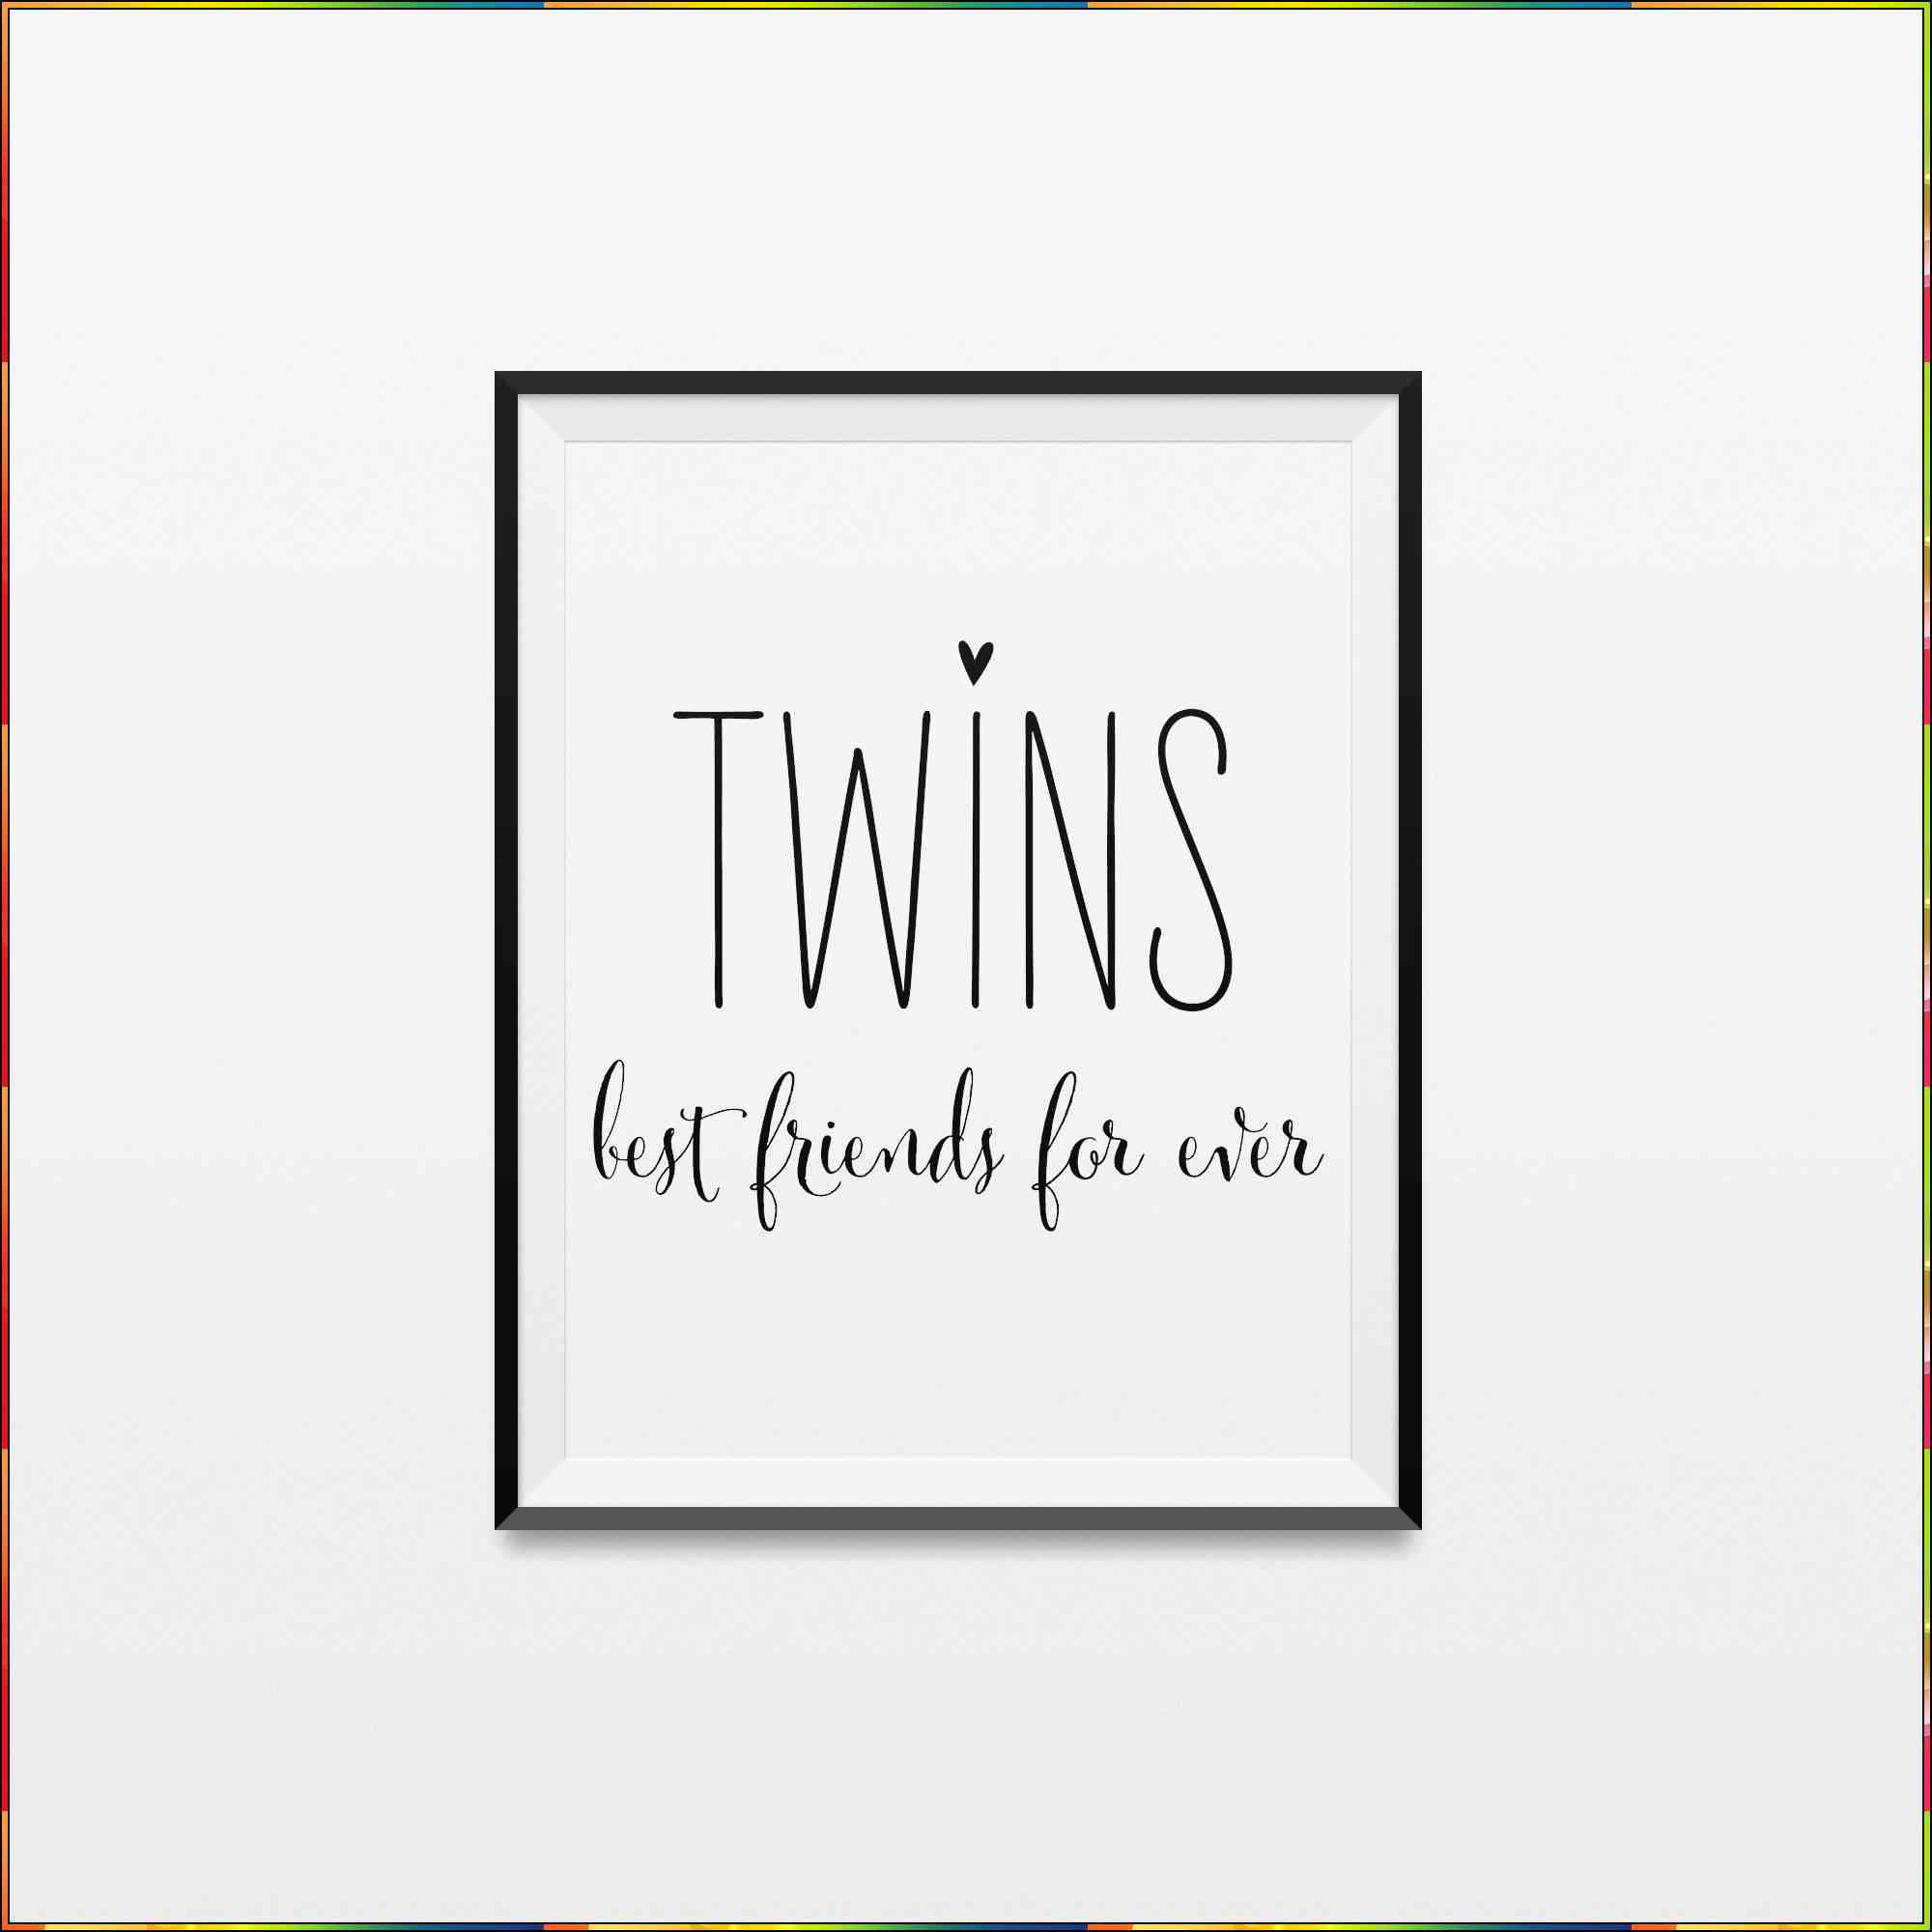 twins birthday images